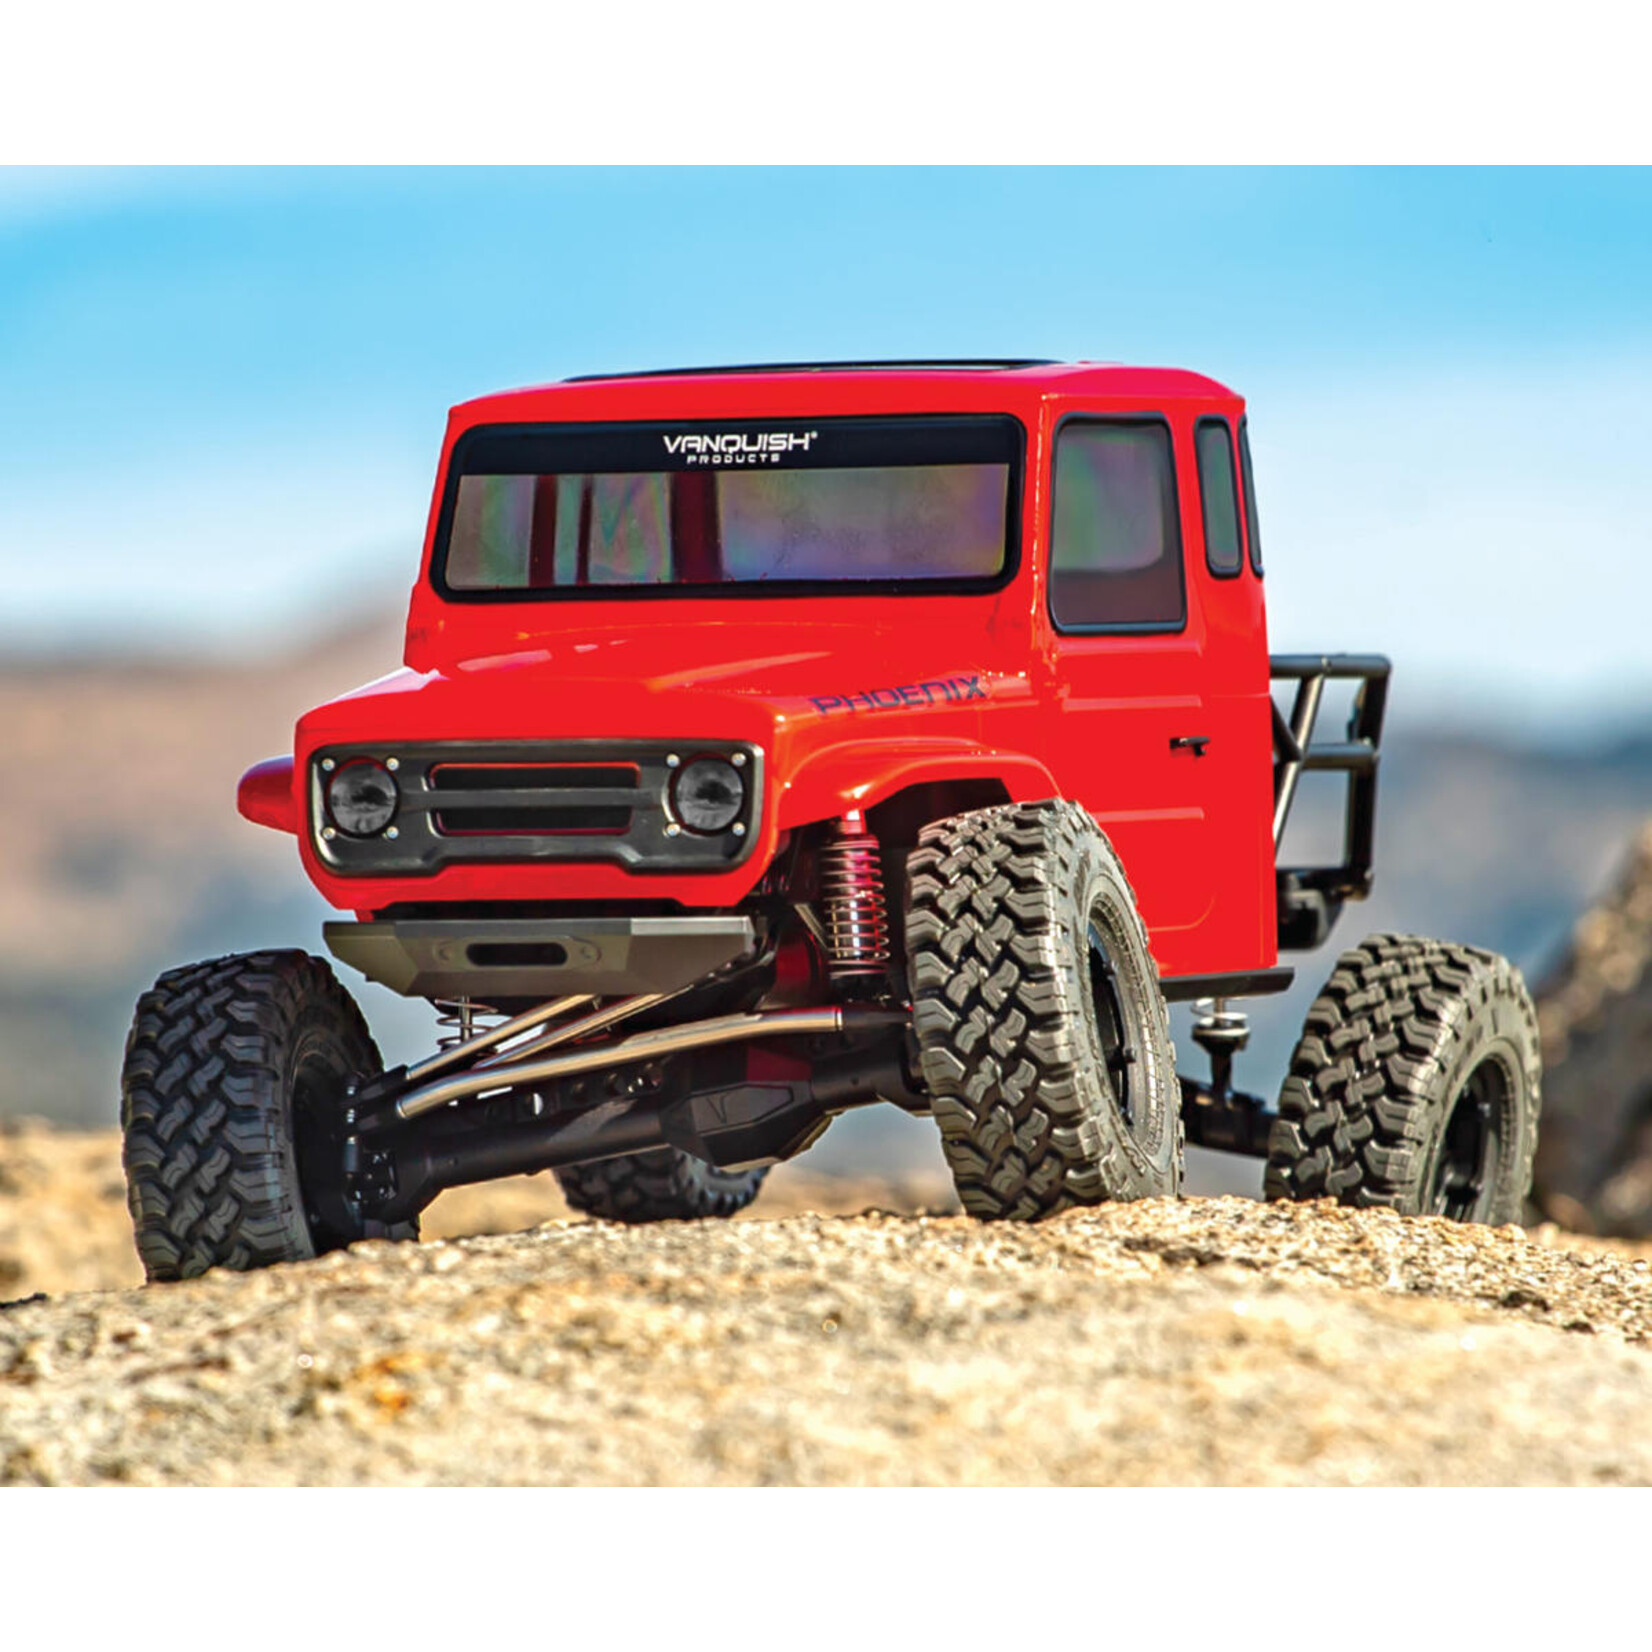 Vanquish Products Vanquish Products VS4-10 Phoenix Straight Axle RTR Rock Crawler (Red) #VPS09011A